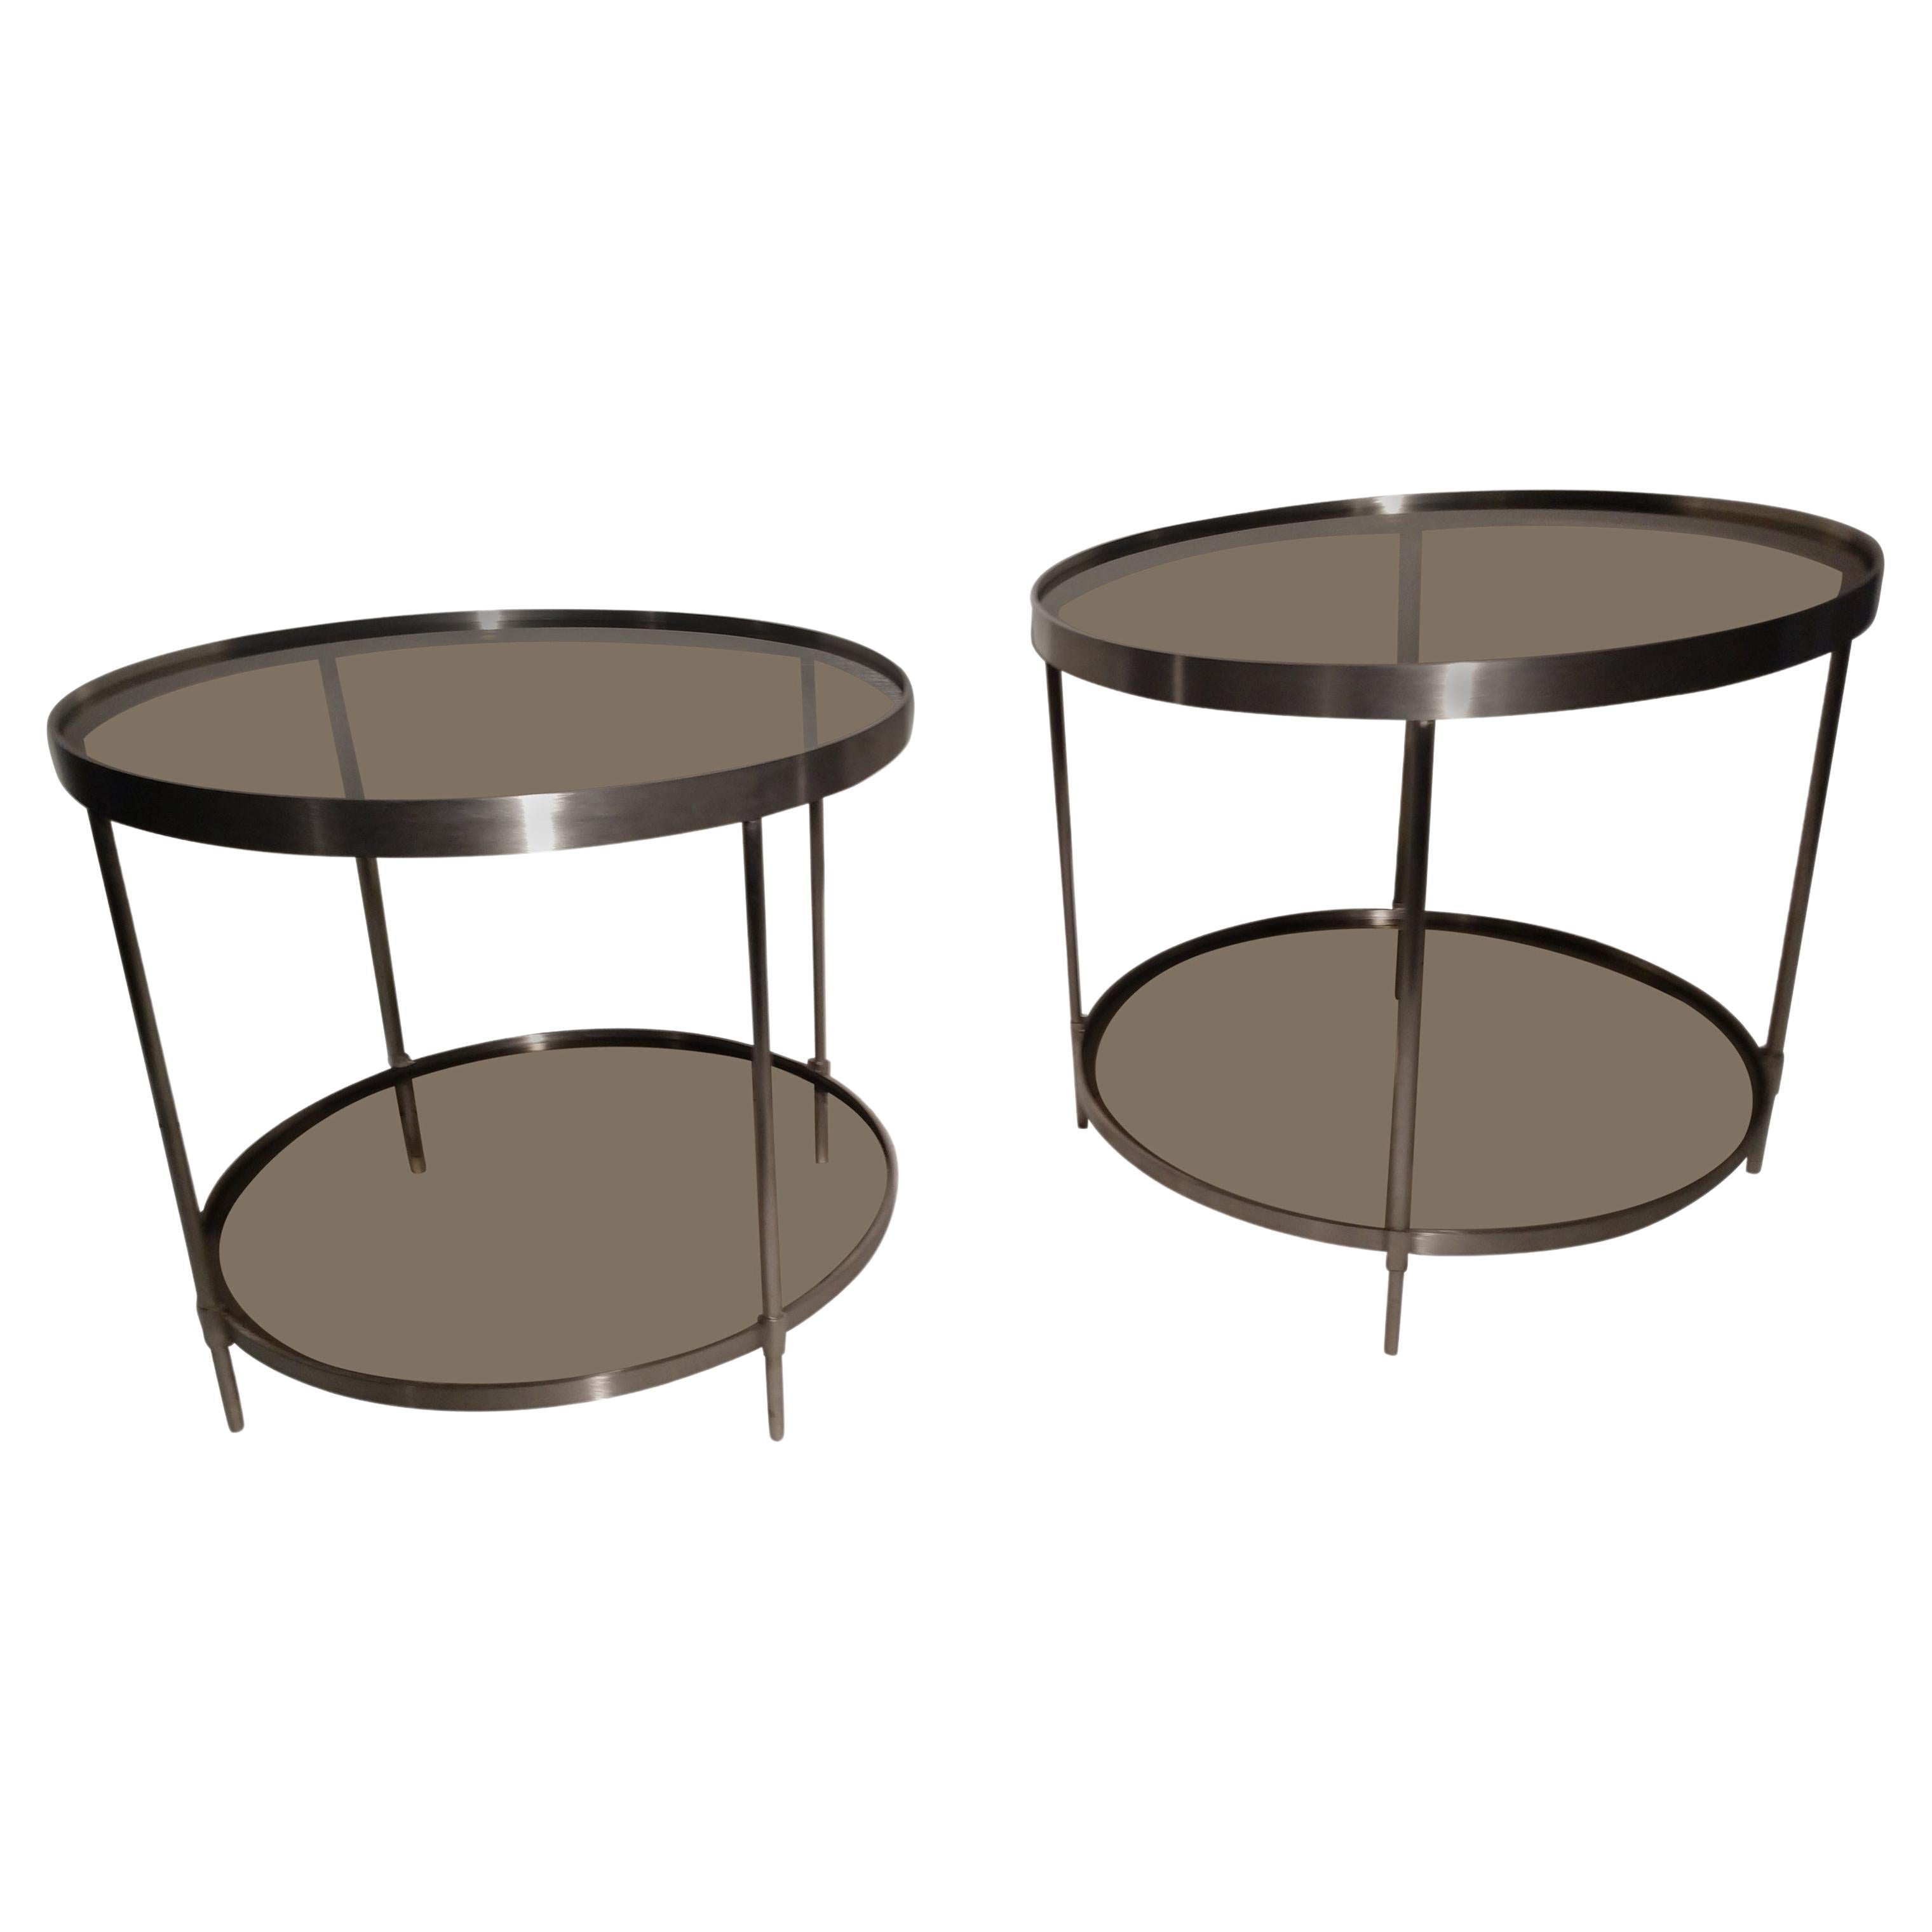 Pair of Mid Century Modern Stainless Steel Round End Tables with Smoked Glass For Sale